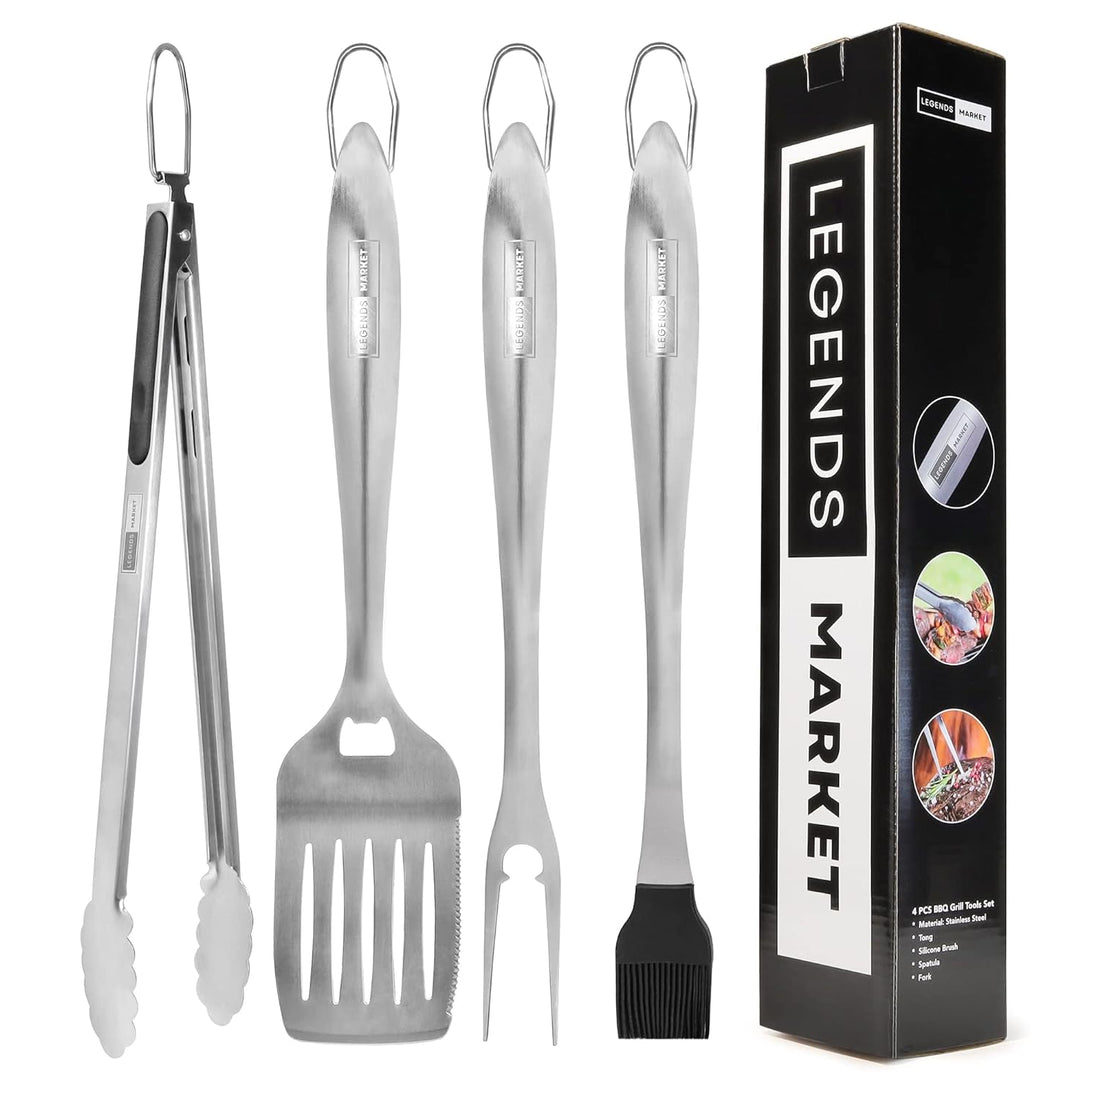 Legends Market Heavy Duty BBQ Grill Tool Set - BBQ Accessories Set 4pc with BBQ Tongs, Spatula, Fork & Brush - Stainless Steel - Outdoor Barbecue Utensils - Gifts for Men & Dad